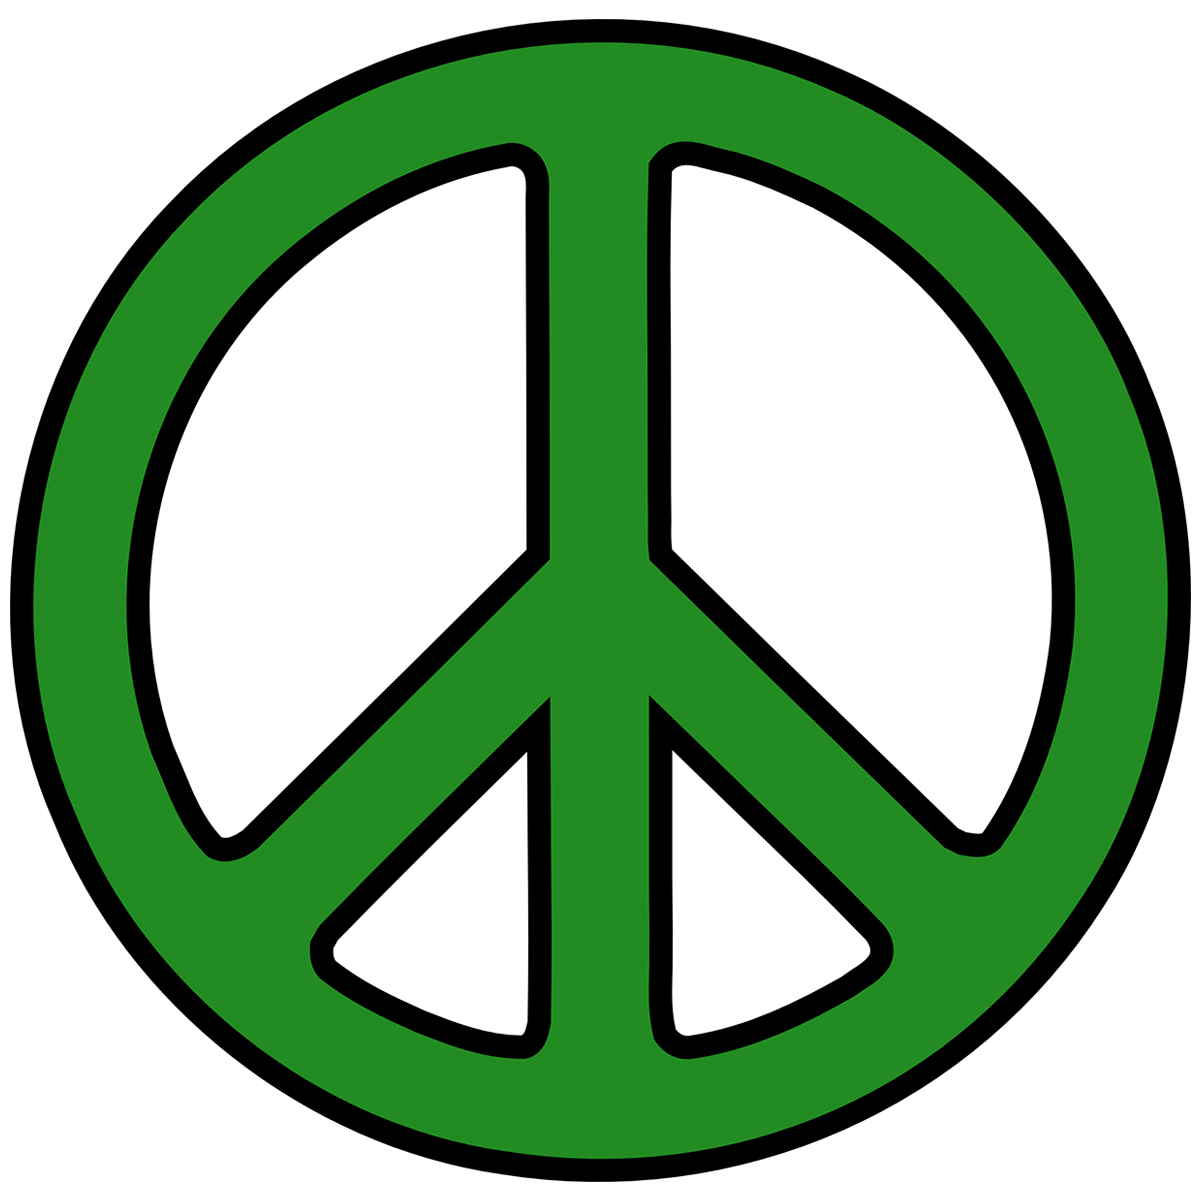 Green Peace Sign Filter - For Facebook profile pictures, Twitter ...